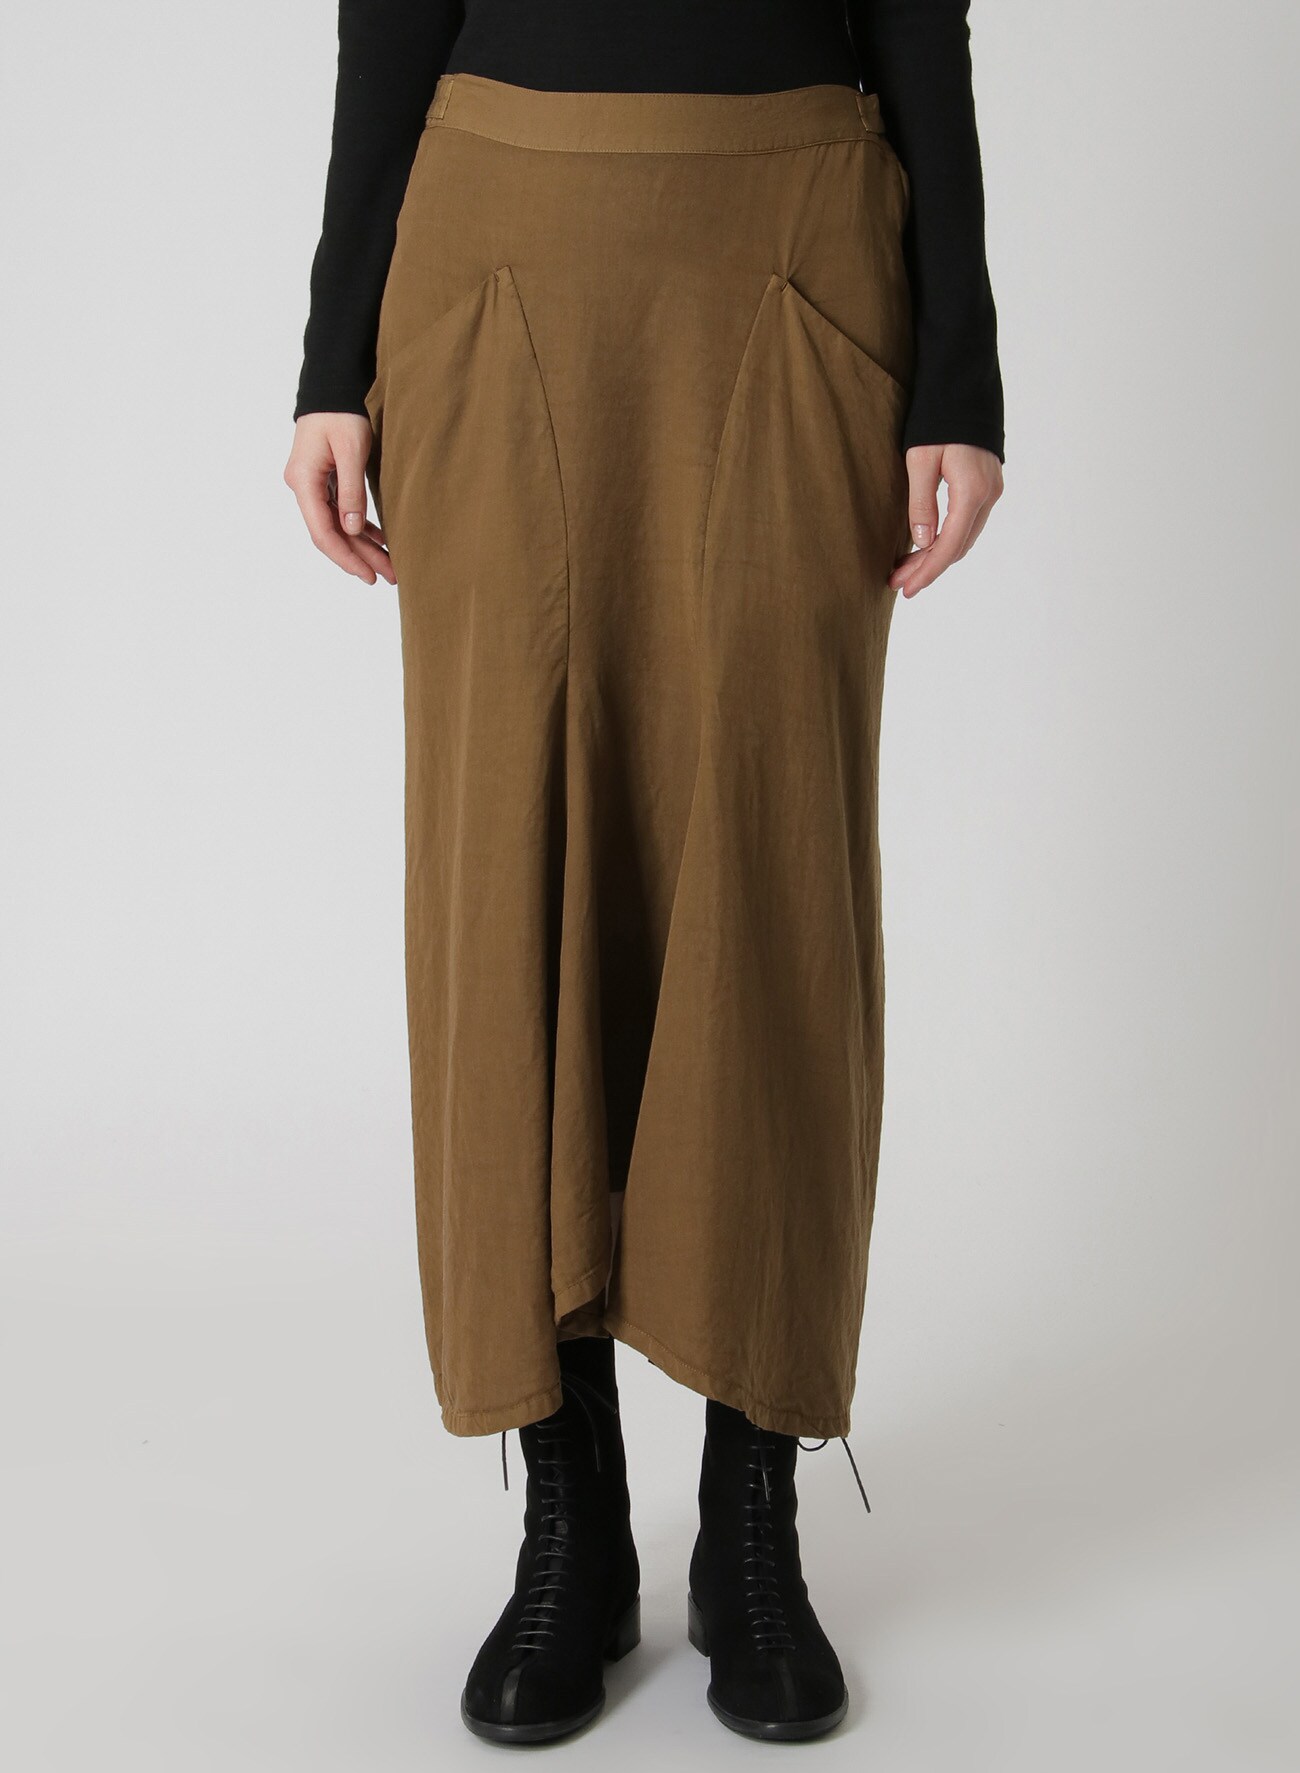 CELLULOSE TWILL GARMENT-DYED LONG POCKET SKIRT(XS Beige): Y's｜THE